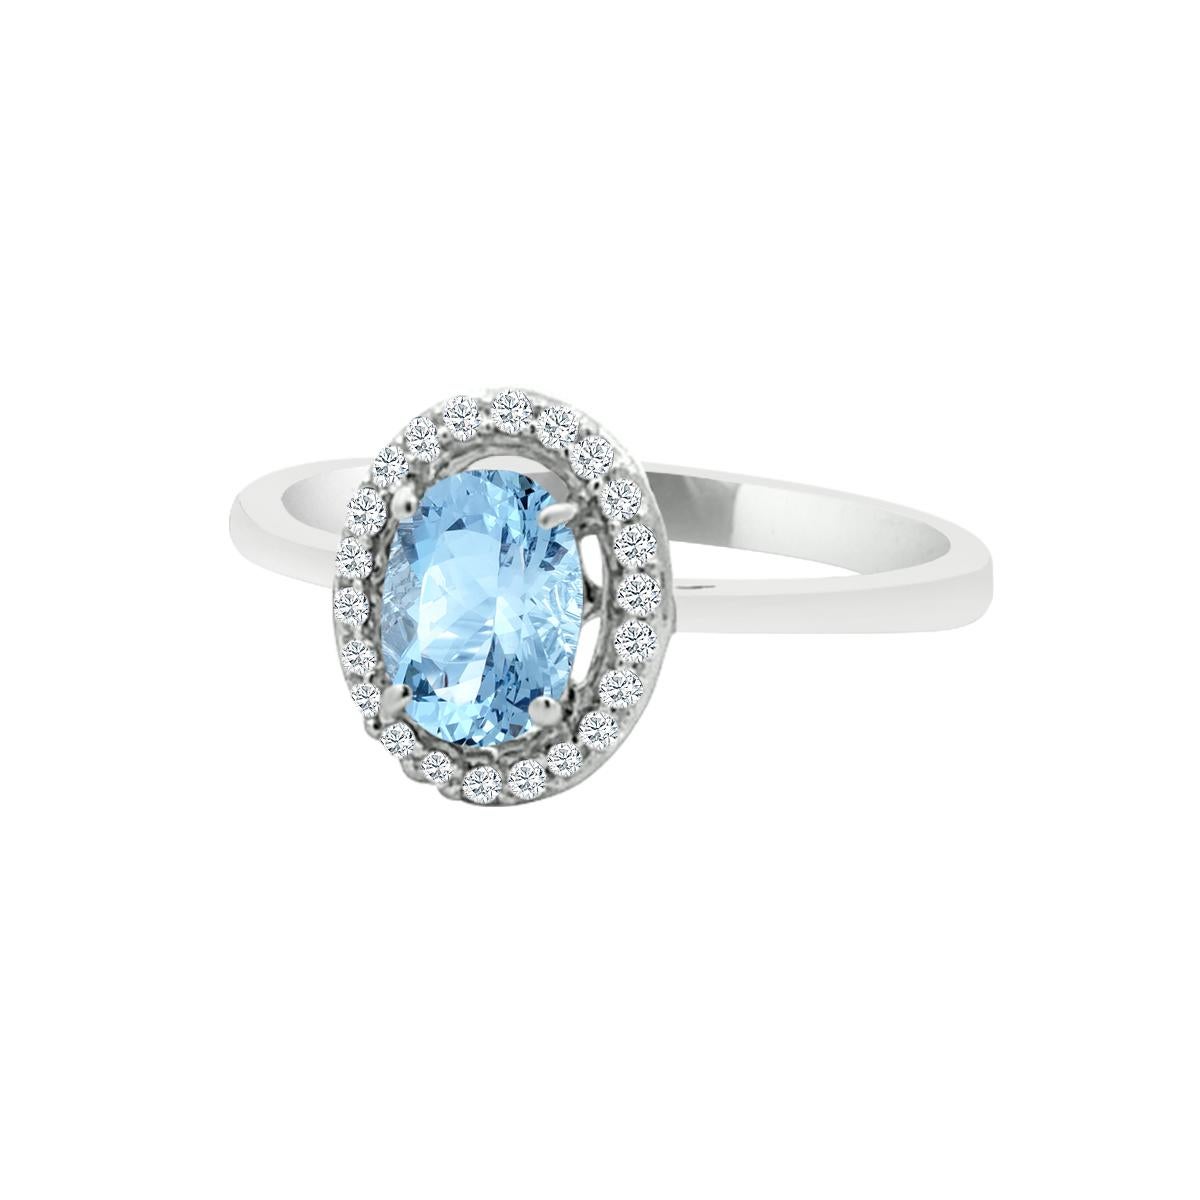 This Stunning Aquamarine And Diamond Engagement Ring Will Sweep Her Off Her Feet.
Bright And Beautiful 7x5mm Oval Shape Center Stone Is Eye Clear With Round Diamonds Surrounding It,
And A Simple 14k White Gold Band Looks Perfect In This Ring.
This